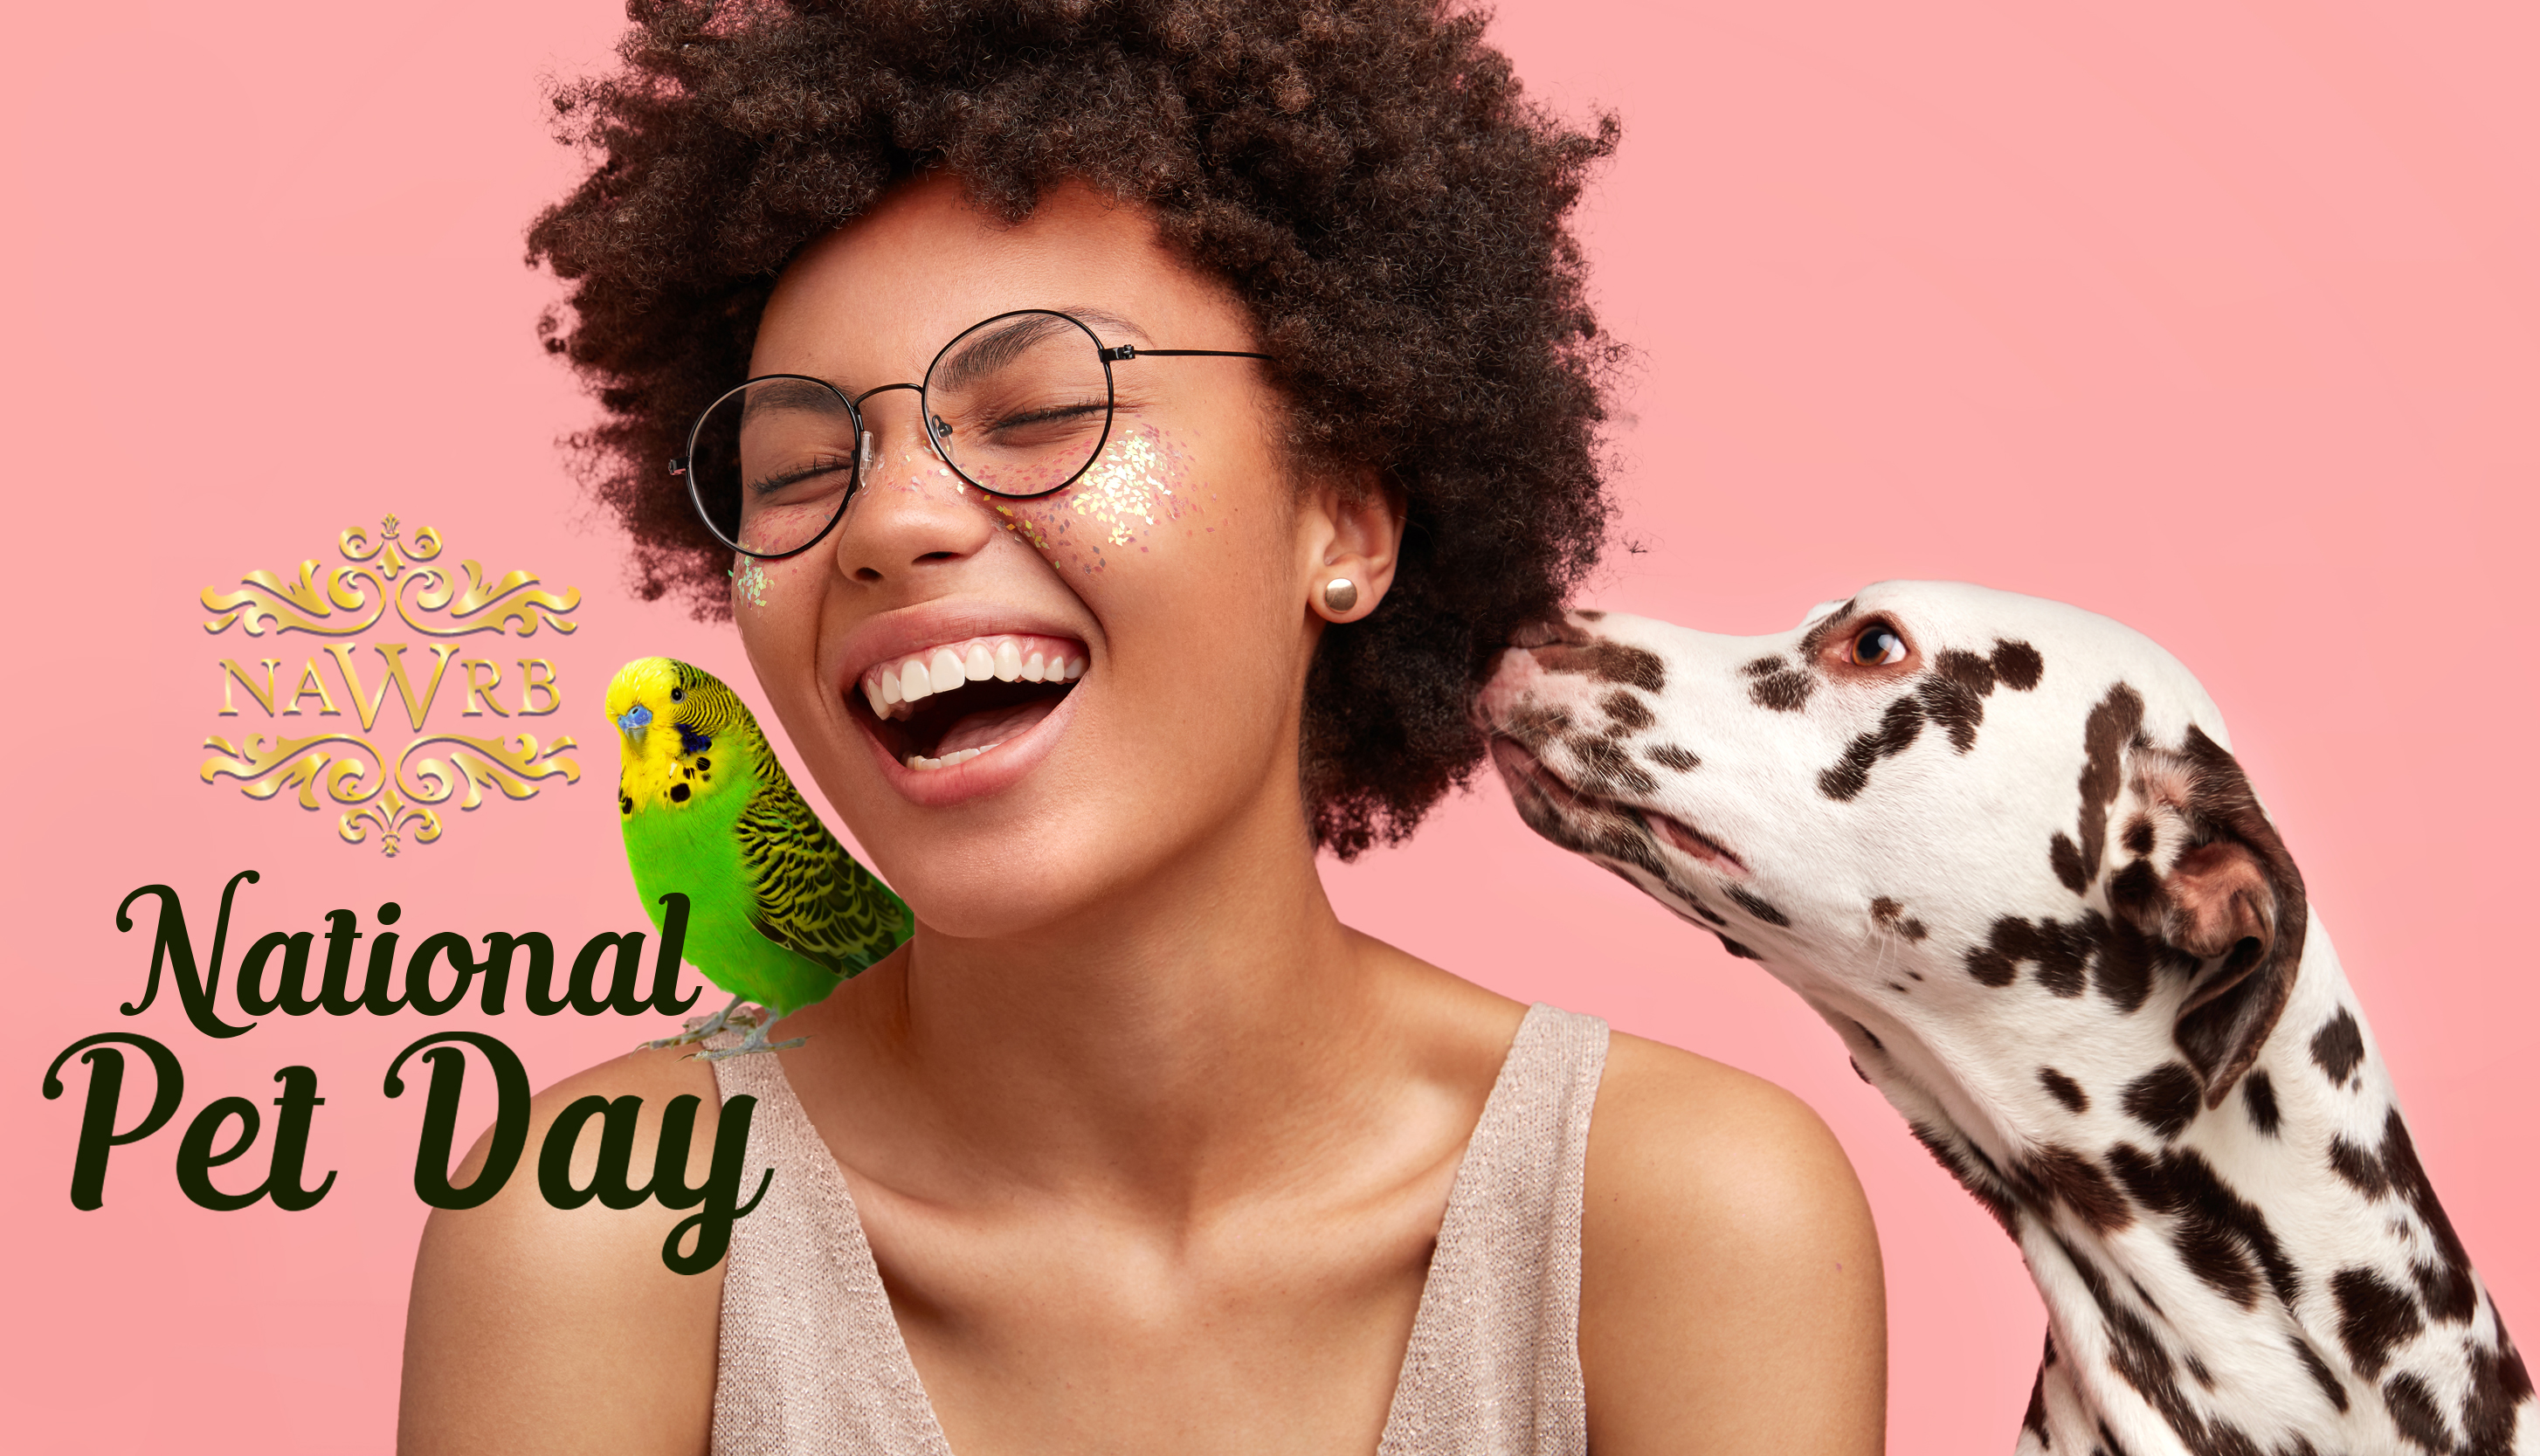 National Pet Day 2019 Meet NAWRB’s Furry Companions! NAWRB